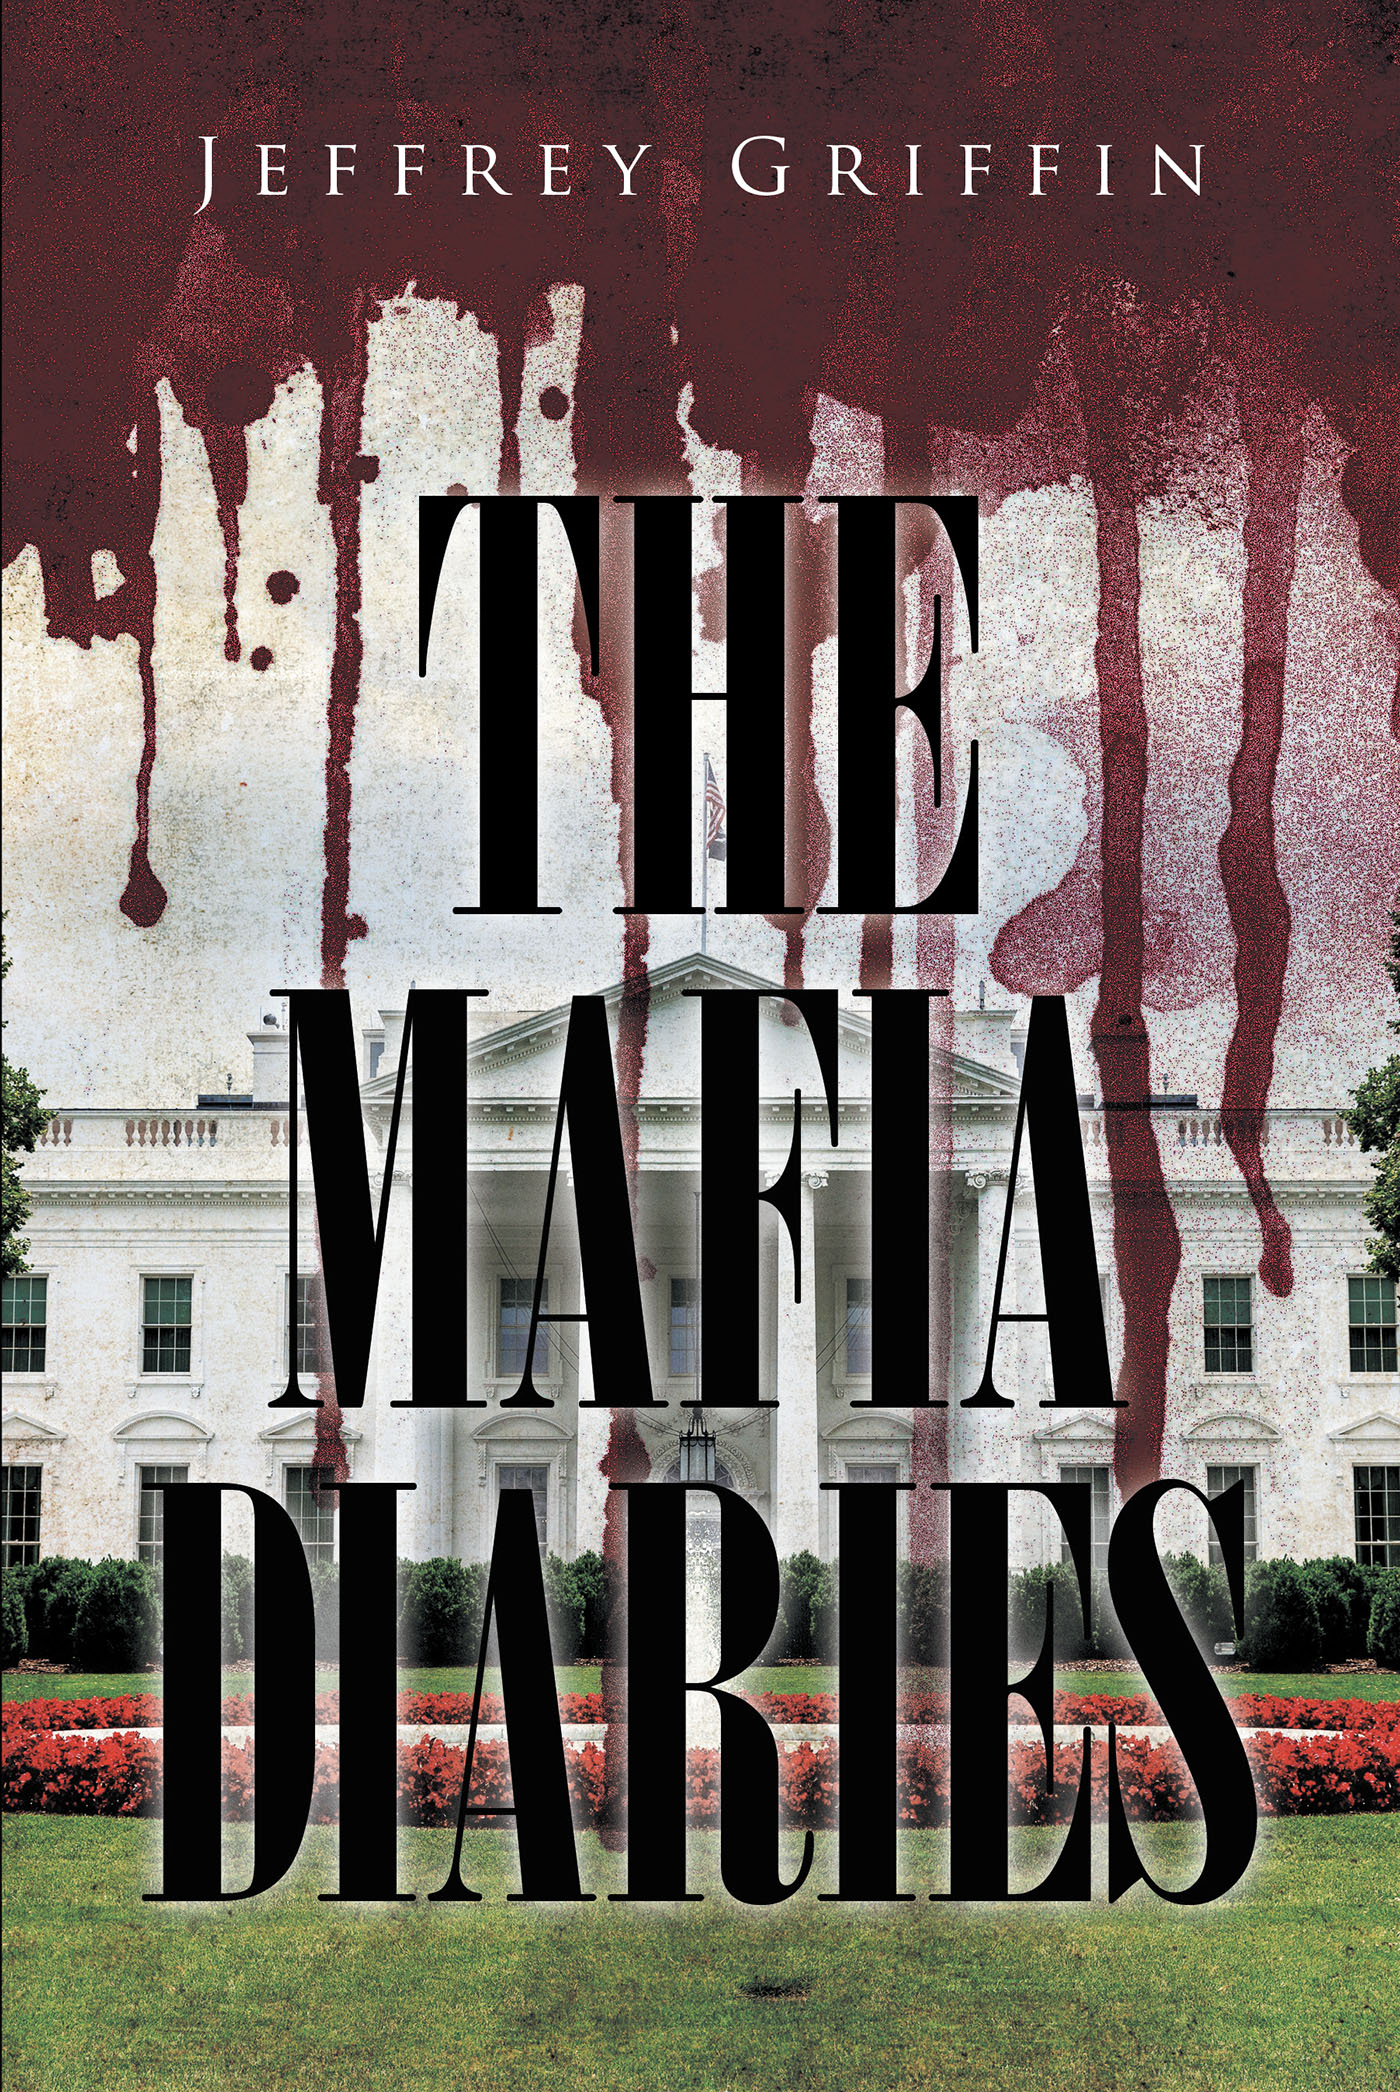 Author Jeffrey Griffin’s New Book, "The Mafia Diaries," Follows Six Italian Immigrants Who Begin Their Own Criminal Enterprise After Escaping Murder Charges Back Home